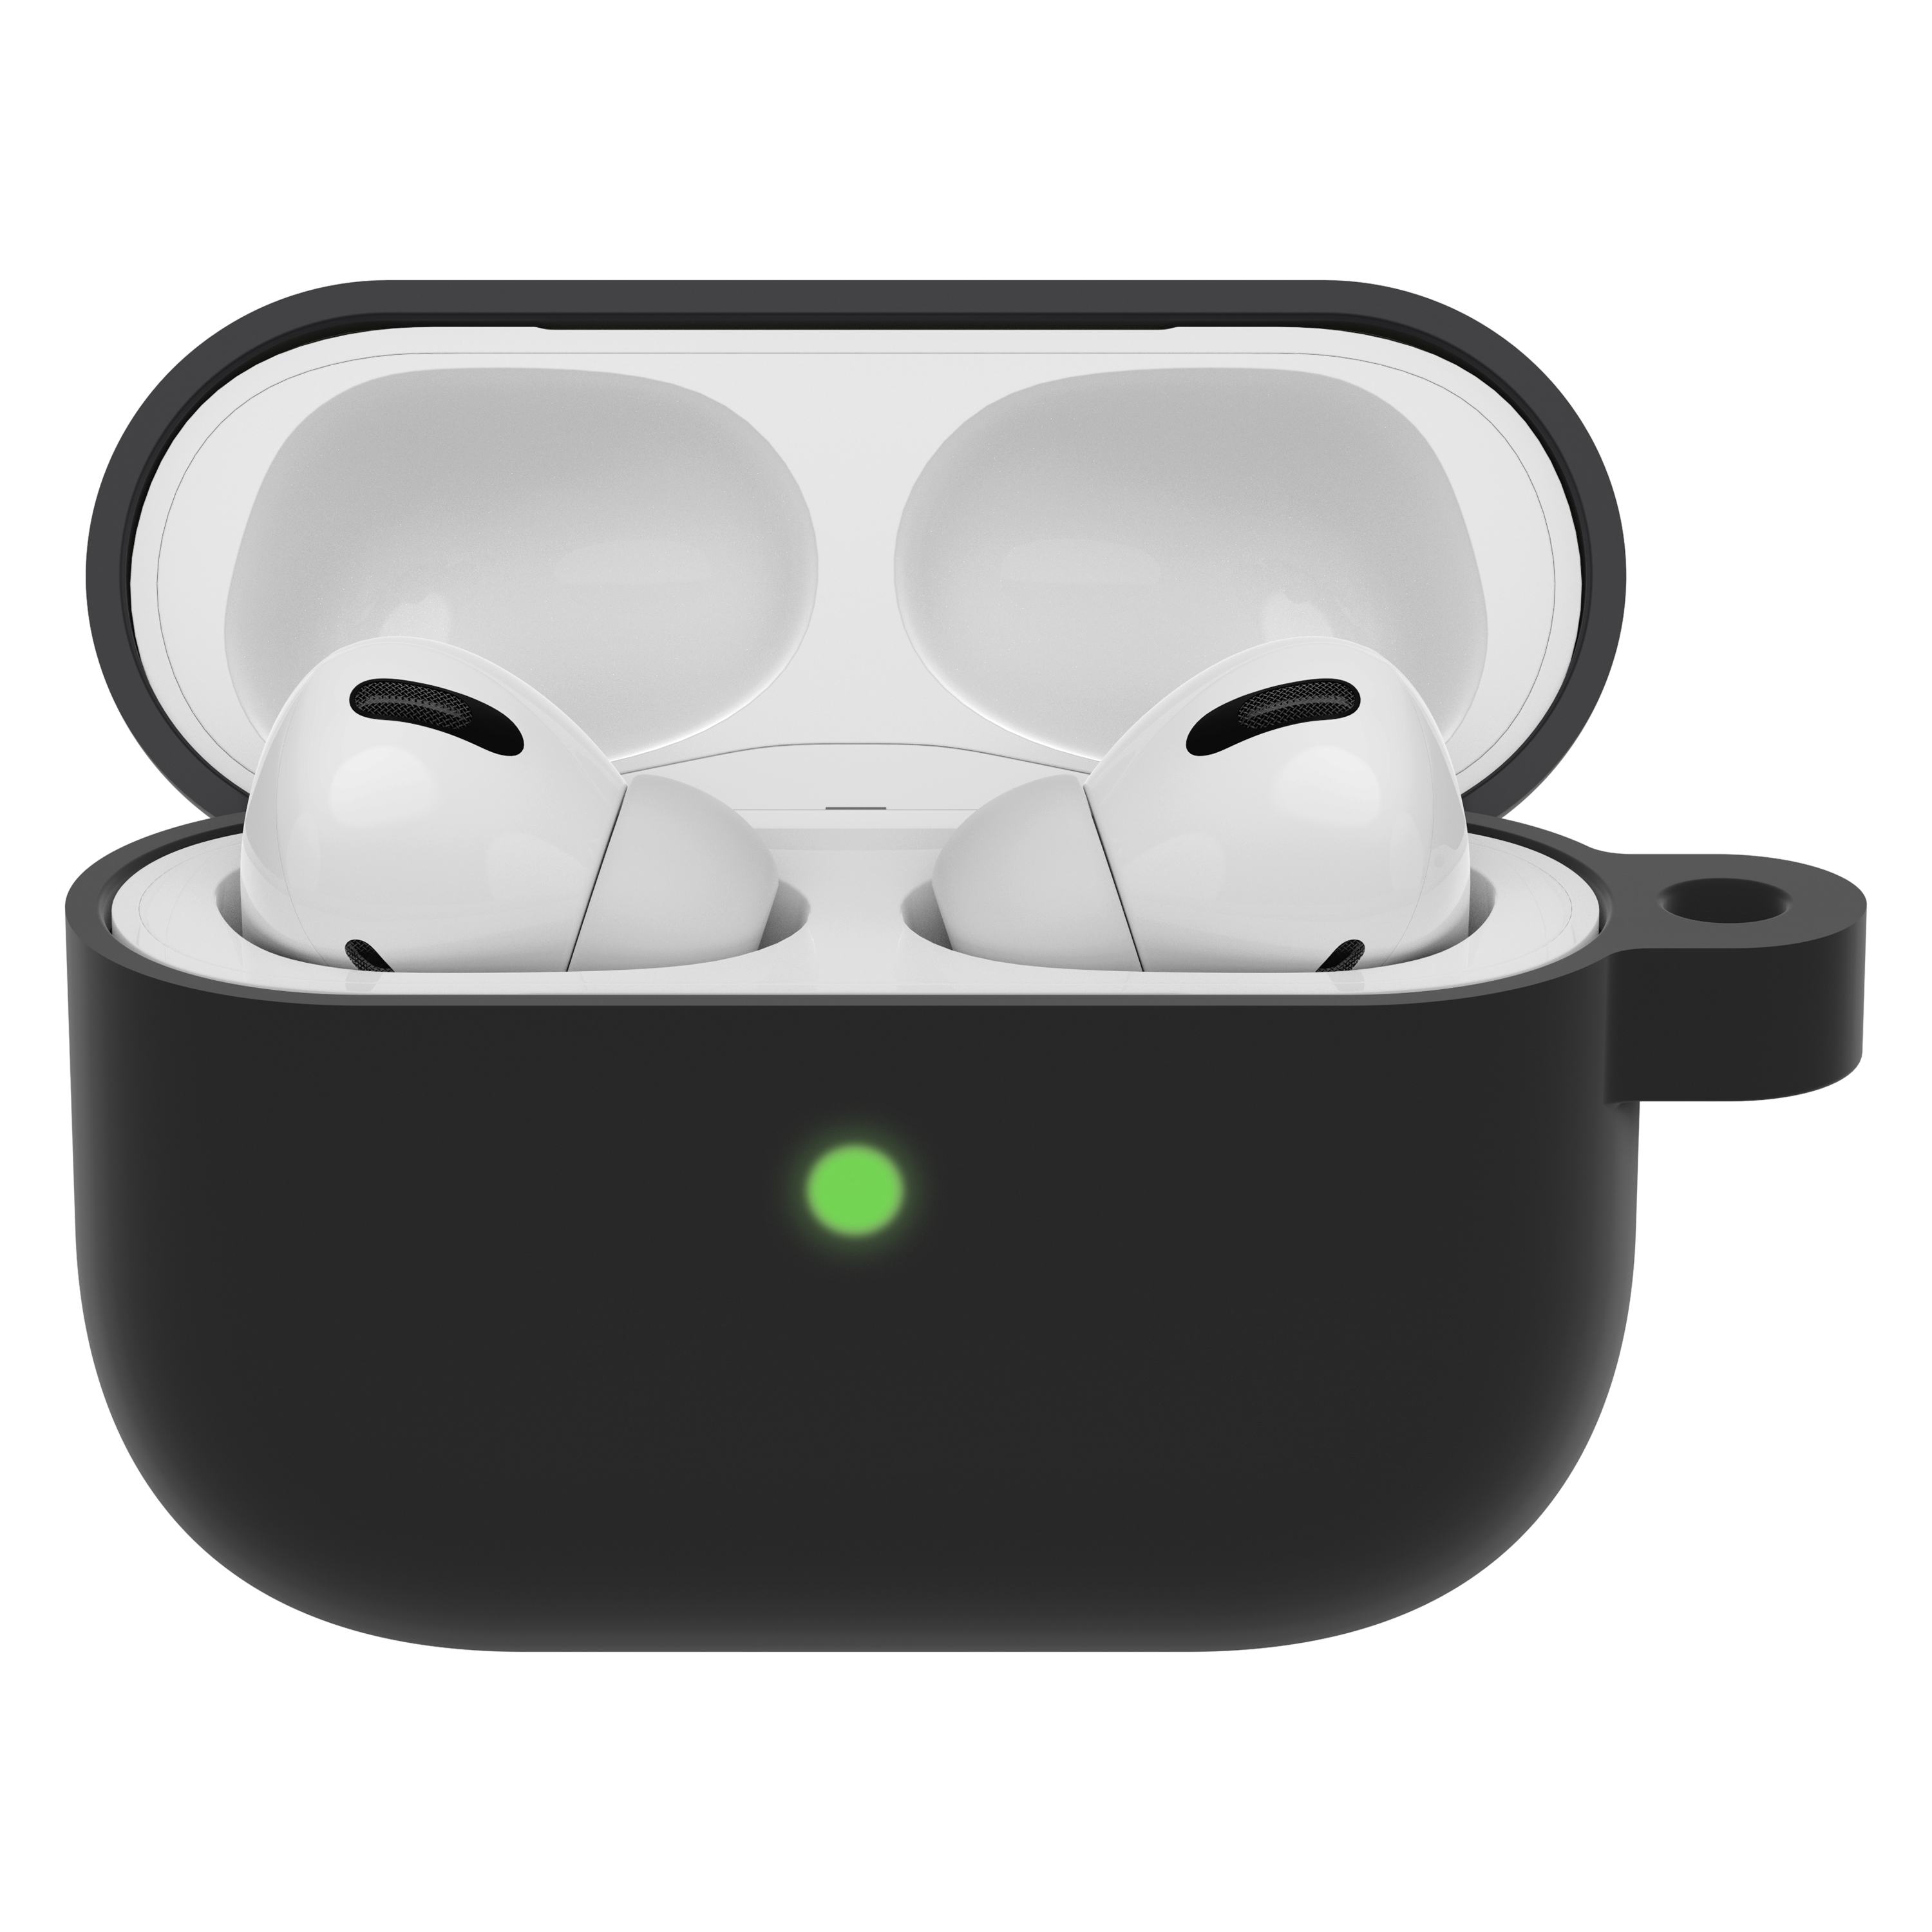 https://www.otterbox.se/on/demandware.static/-/Sites-masterCatalog/default/dw491da8e9/productimages/dis/cases-screen-protection/soft-touch-airpods-pro/soft-touch-airpods-pro-blacktaffy-1.jpg